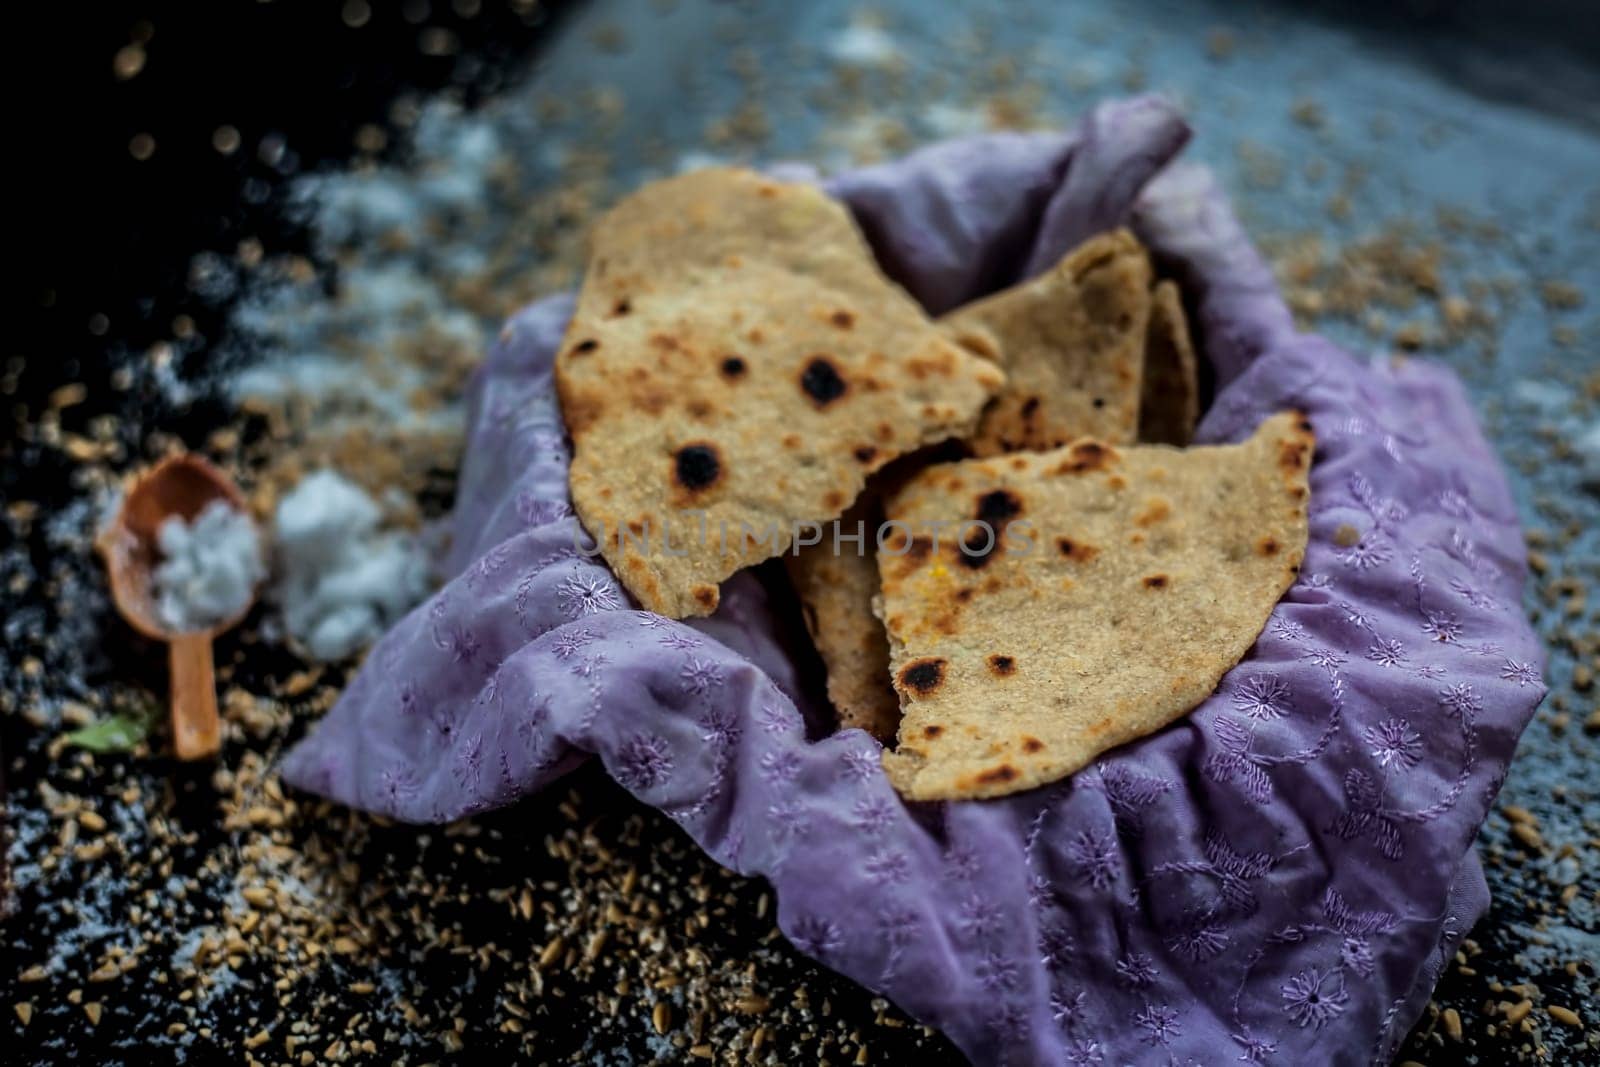 Close-up shot of round bread Bhakri on the black wooden surface along with some raw whole wheat, and salt in a container. Shot of Bhakri in a container on the black surface.